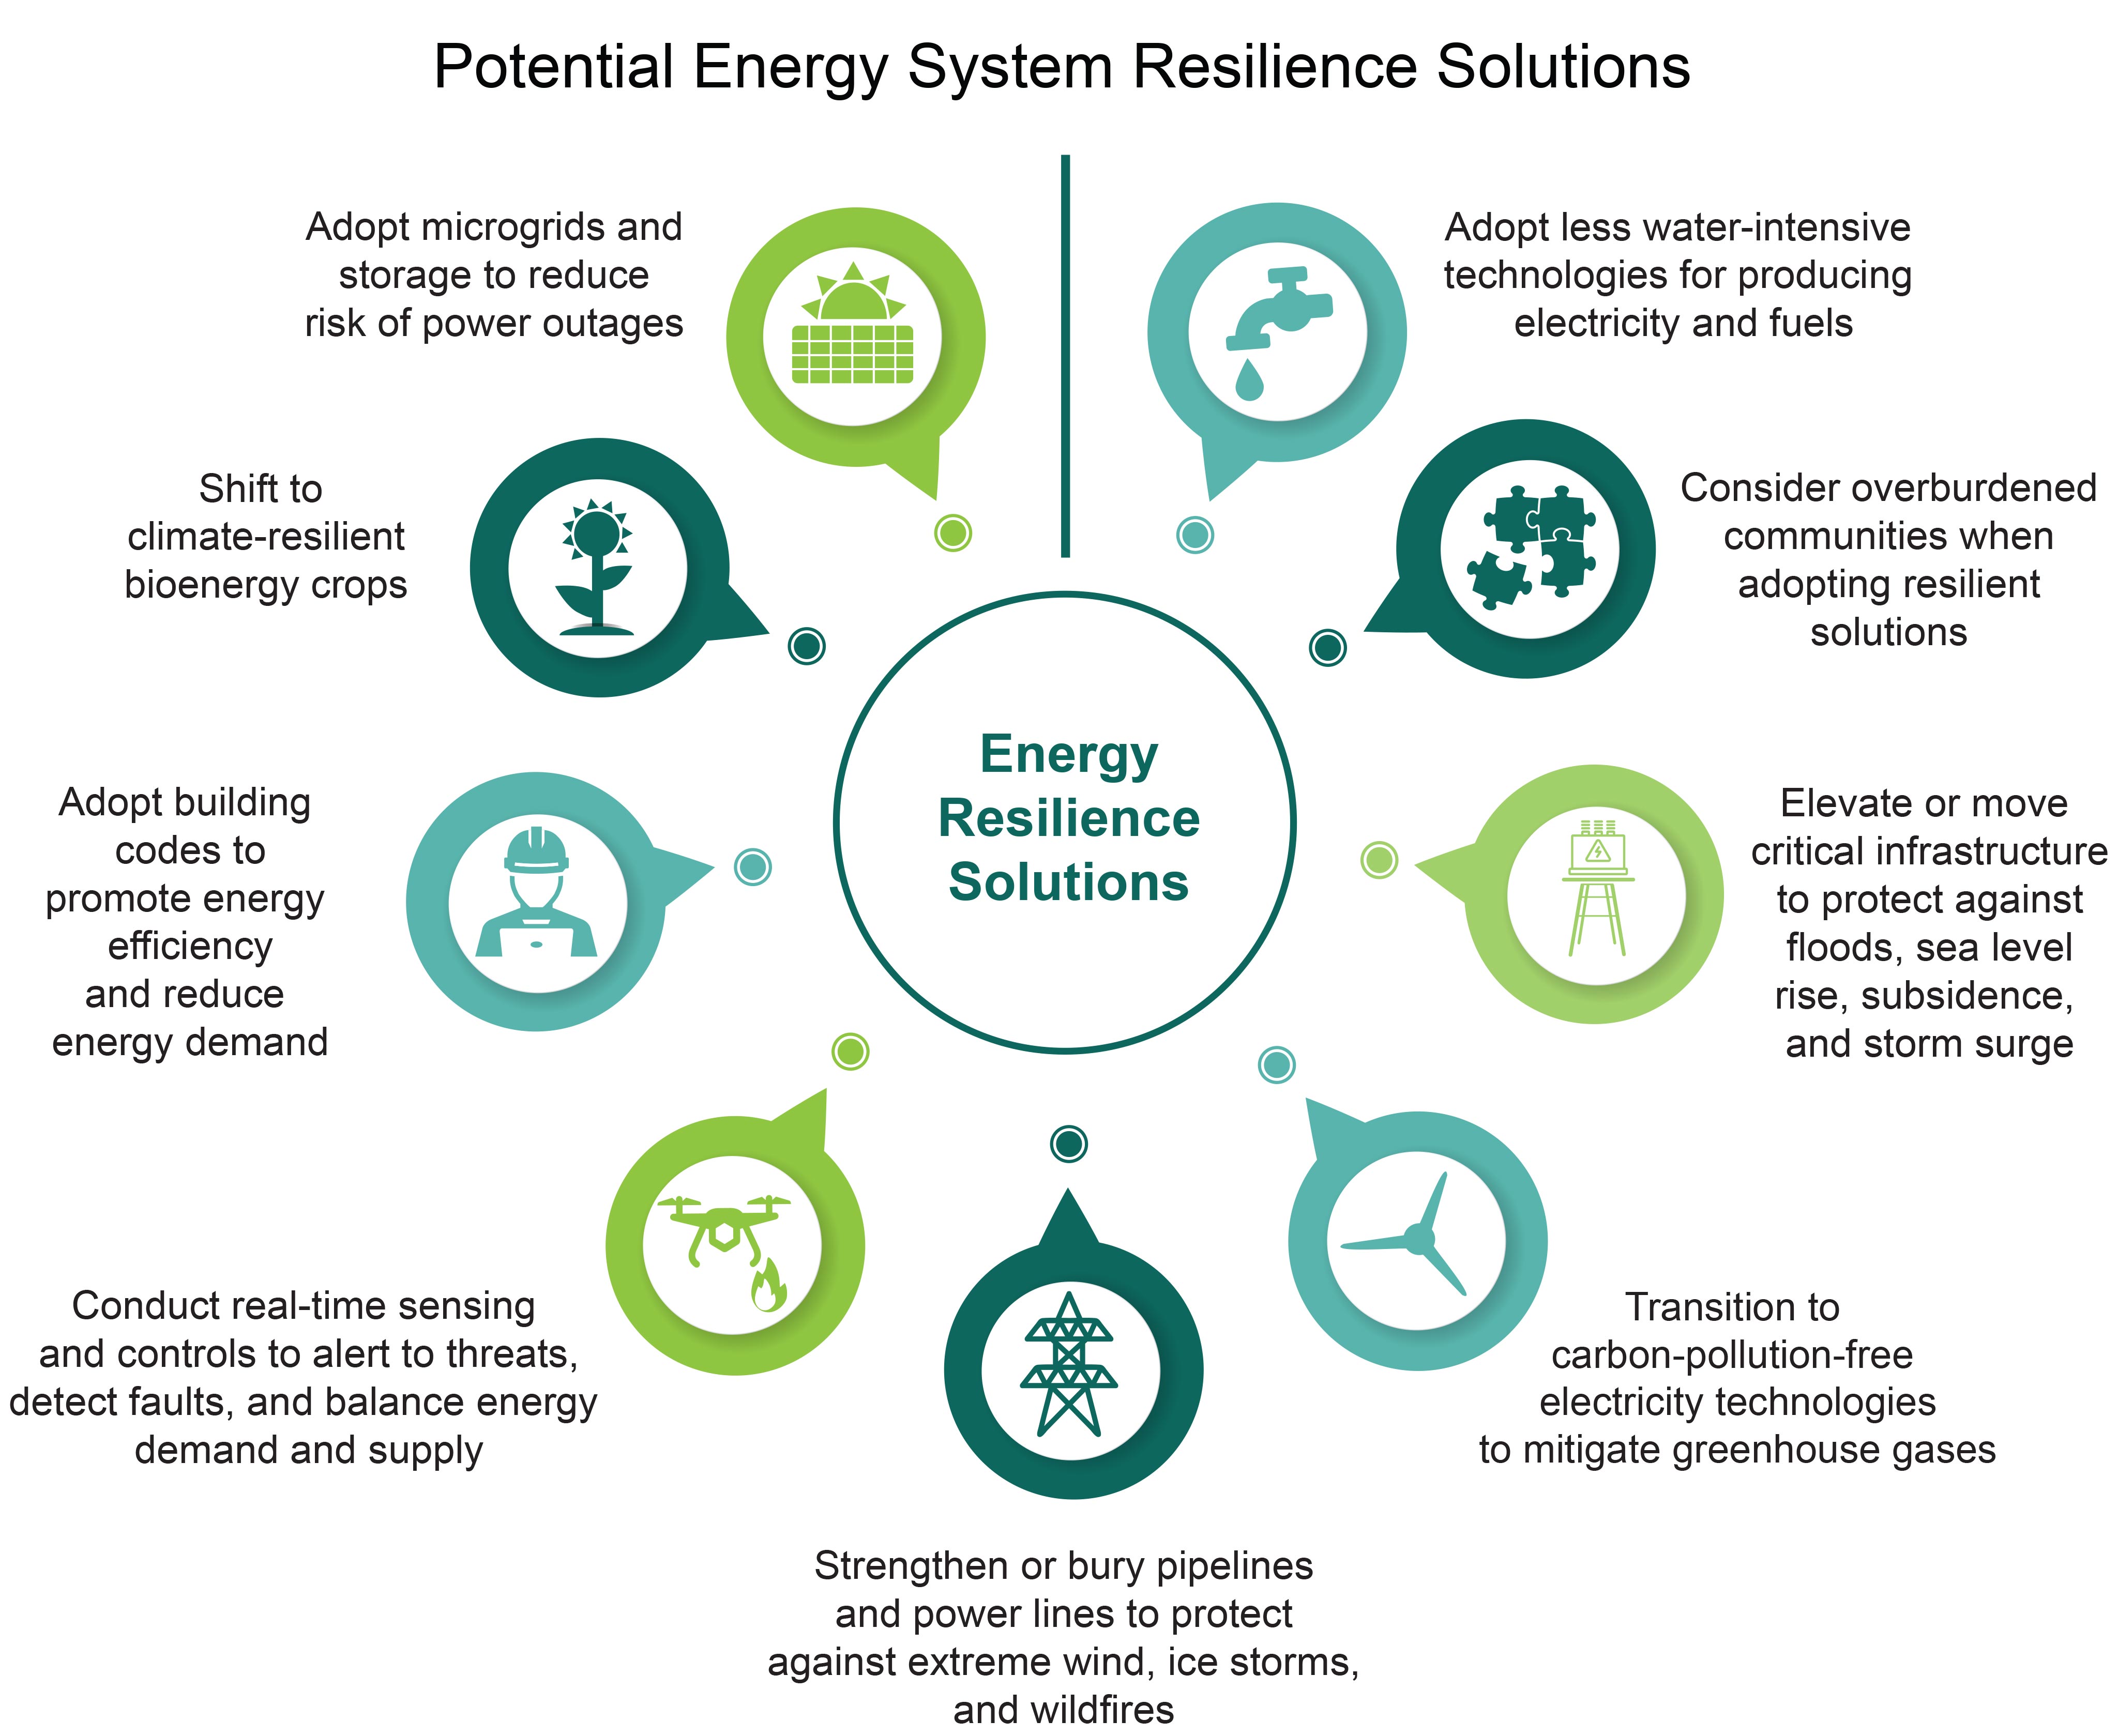 Potential Energy System Resilience Solutions